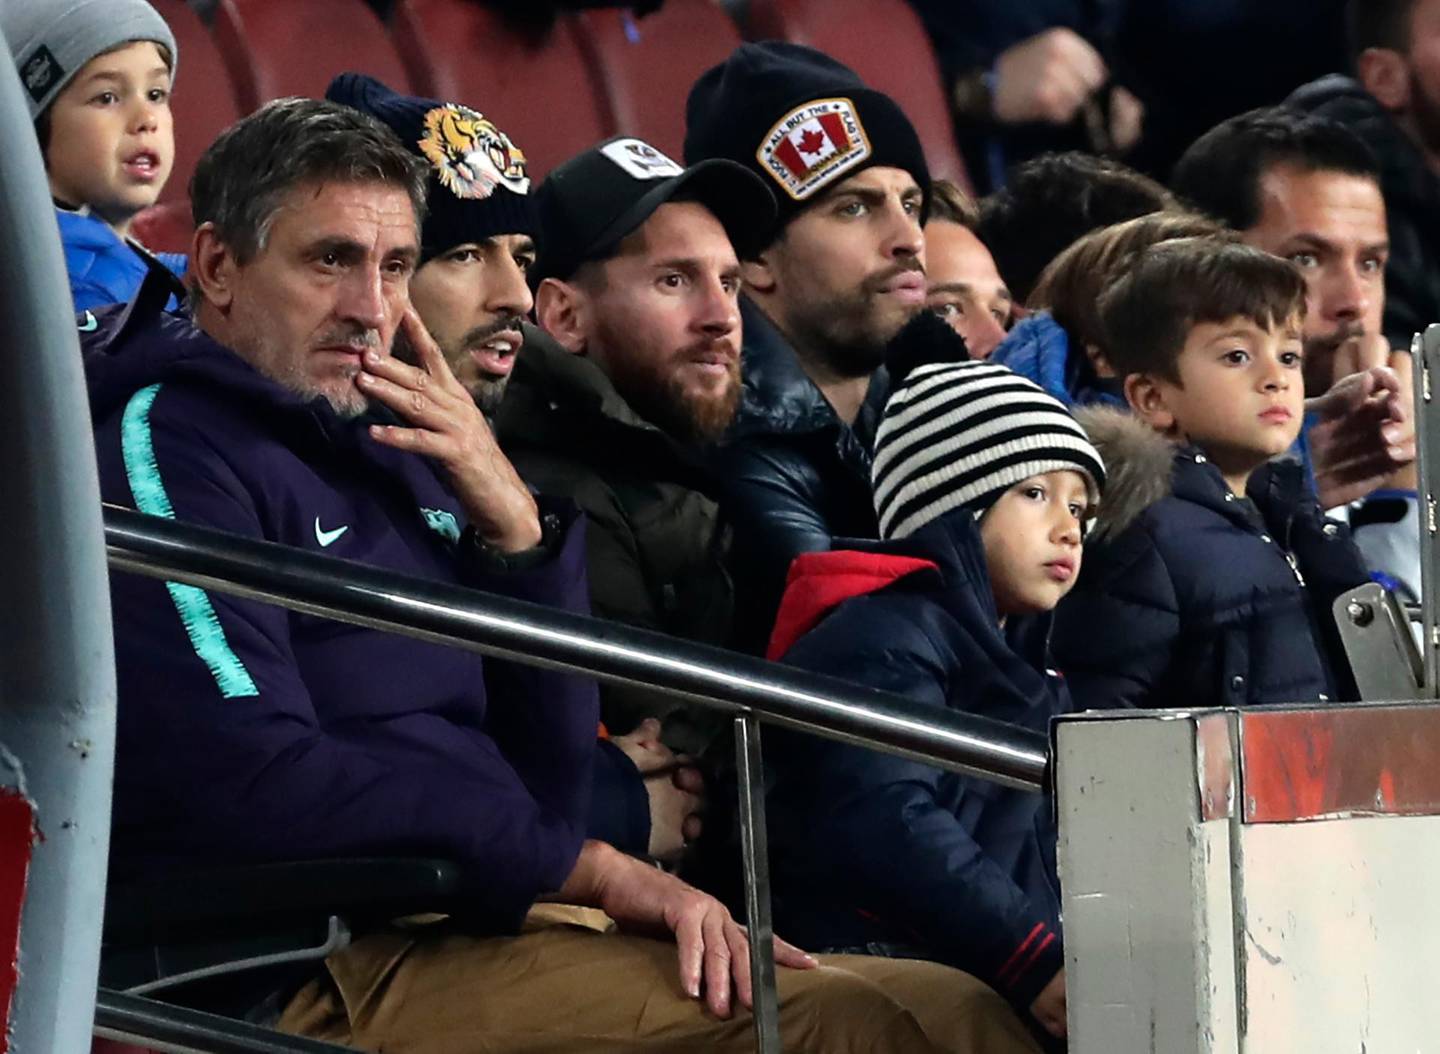 FC Barcelona's Lionel Messi, third left, Luis Suarez, second left, and Gerard Pique, center right, sit is the stands prior of a Spanish Copa del Rey soccer match between FC Barcelona and Cultural Leonesa at the Camp Nou stadium in Barcelona, Spain, Wednesday, Dec. 5, 2018. (AP Photo/Manu Fernandez)